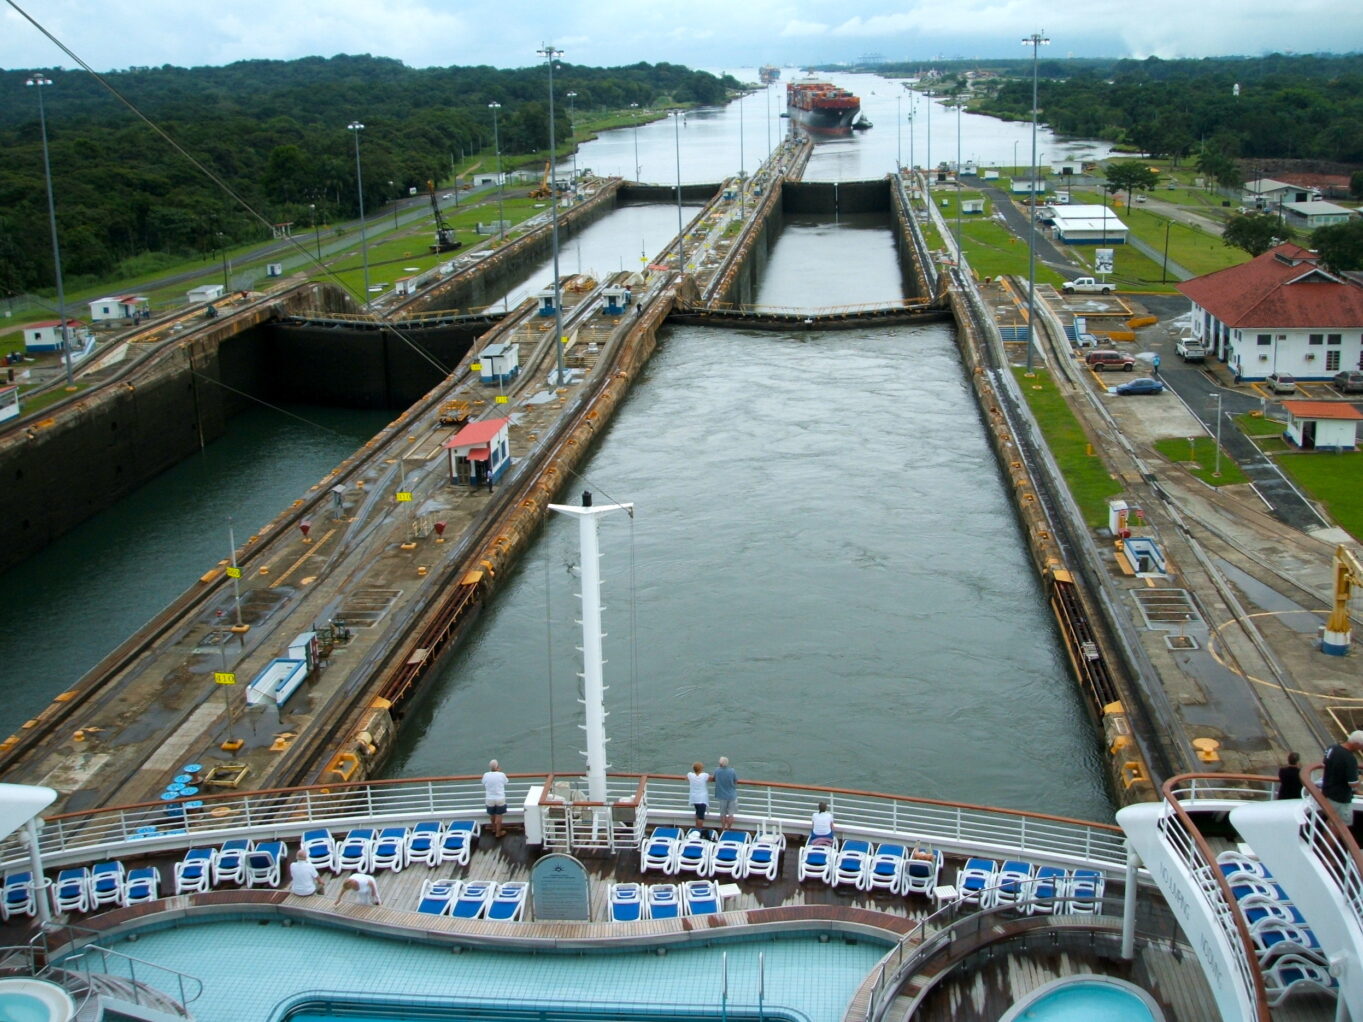 The narrow Panama canal seen from a ship